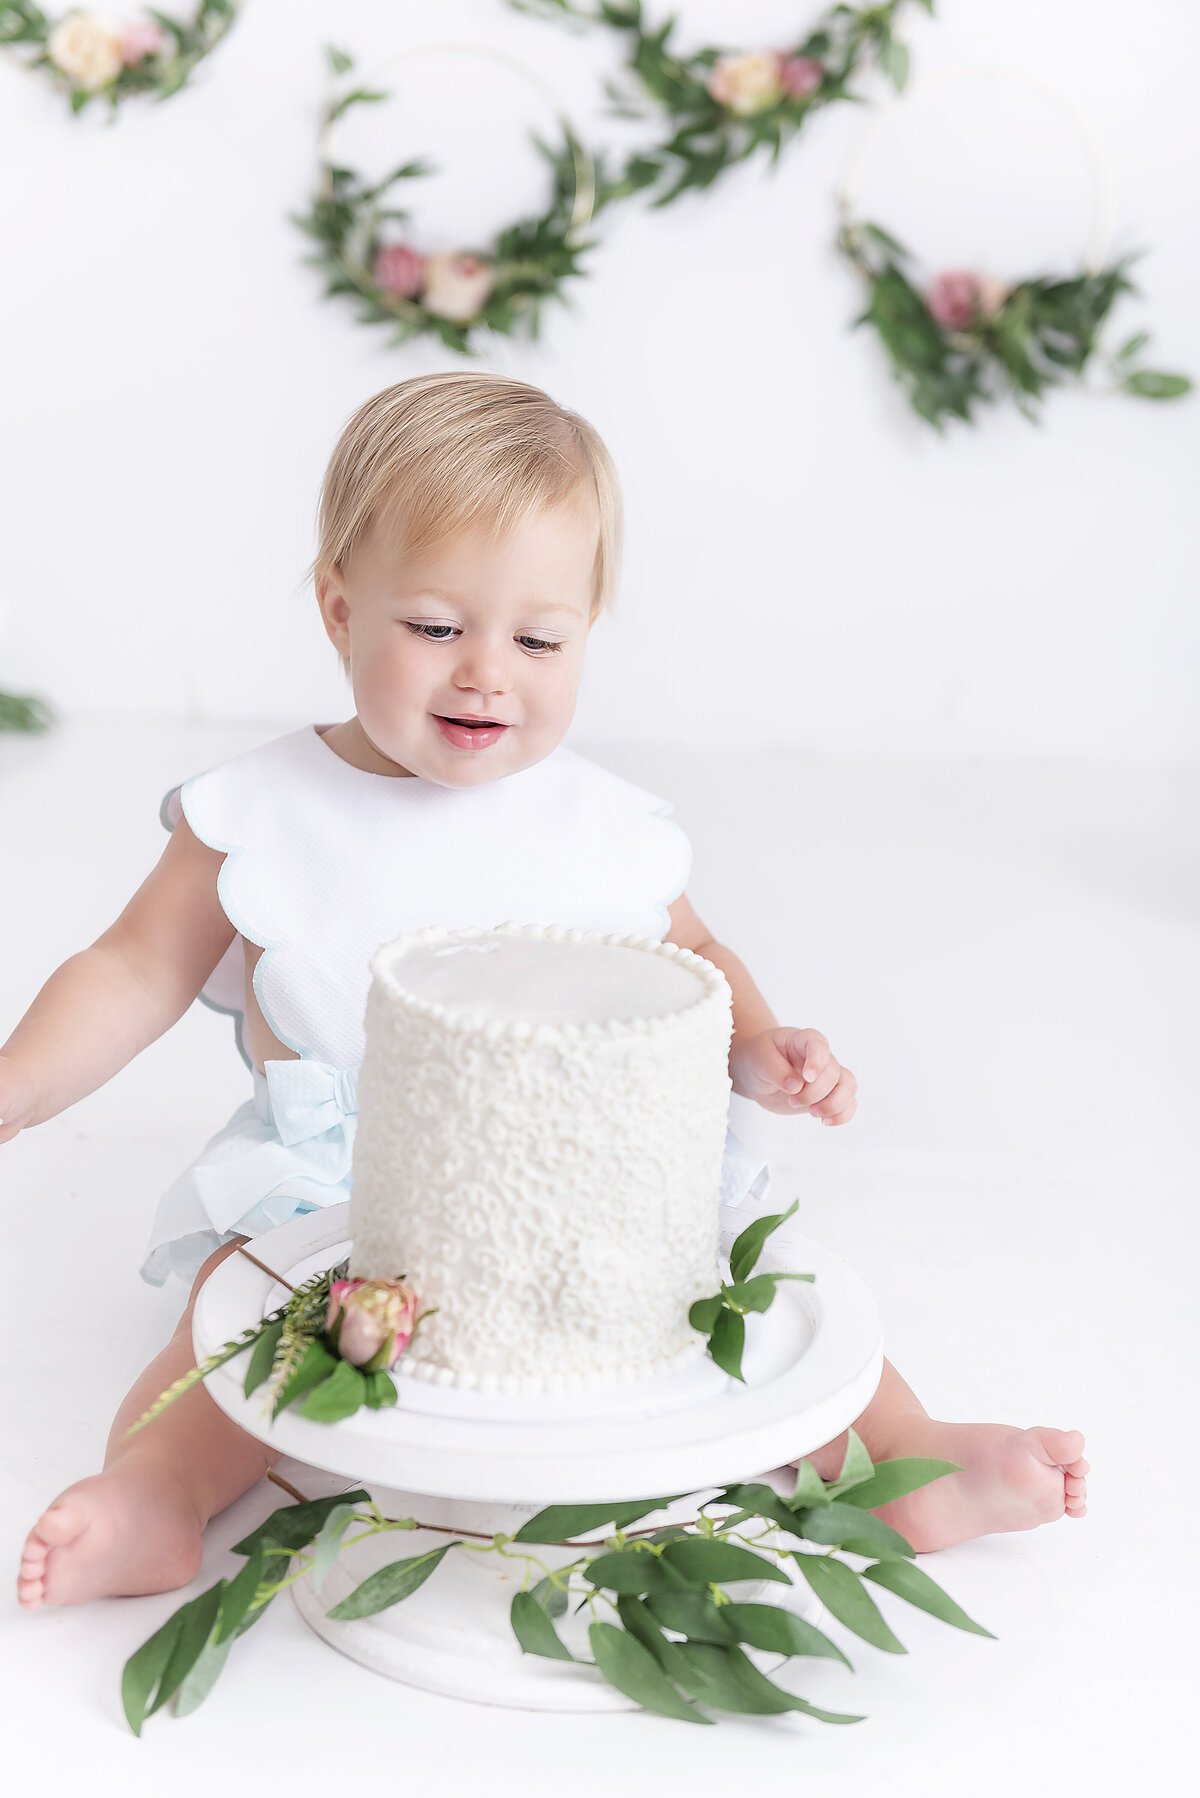 A toddler in a white dress looks at a cake she was about to smash in a studio